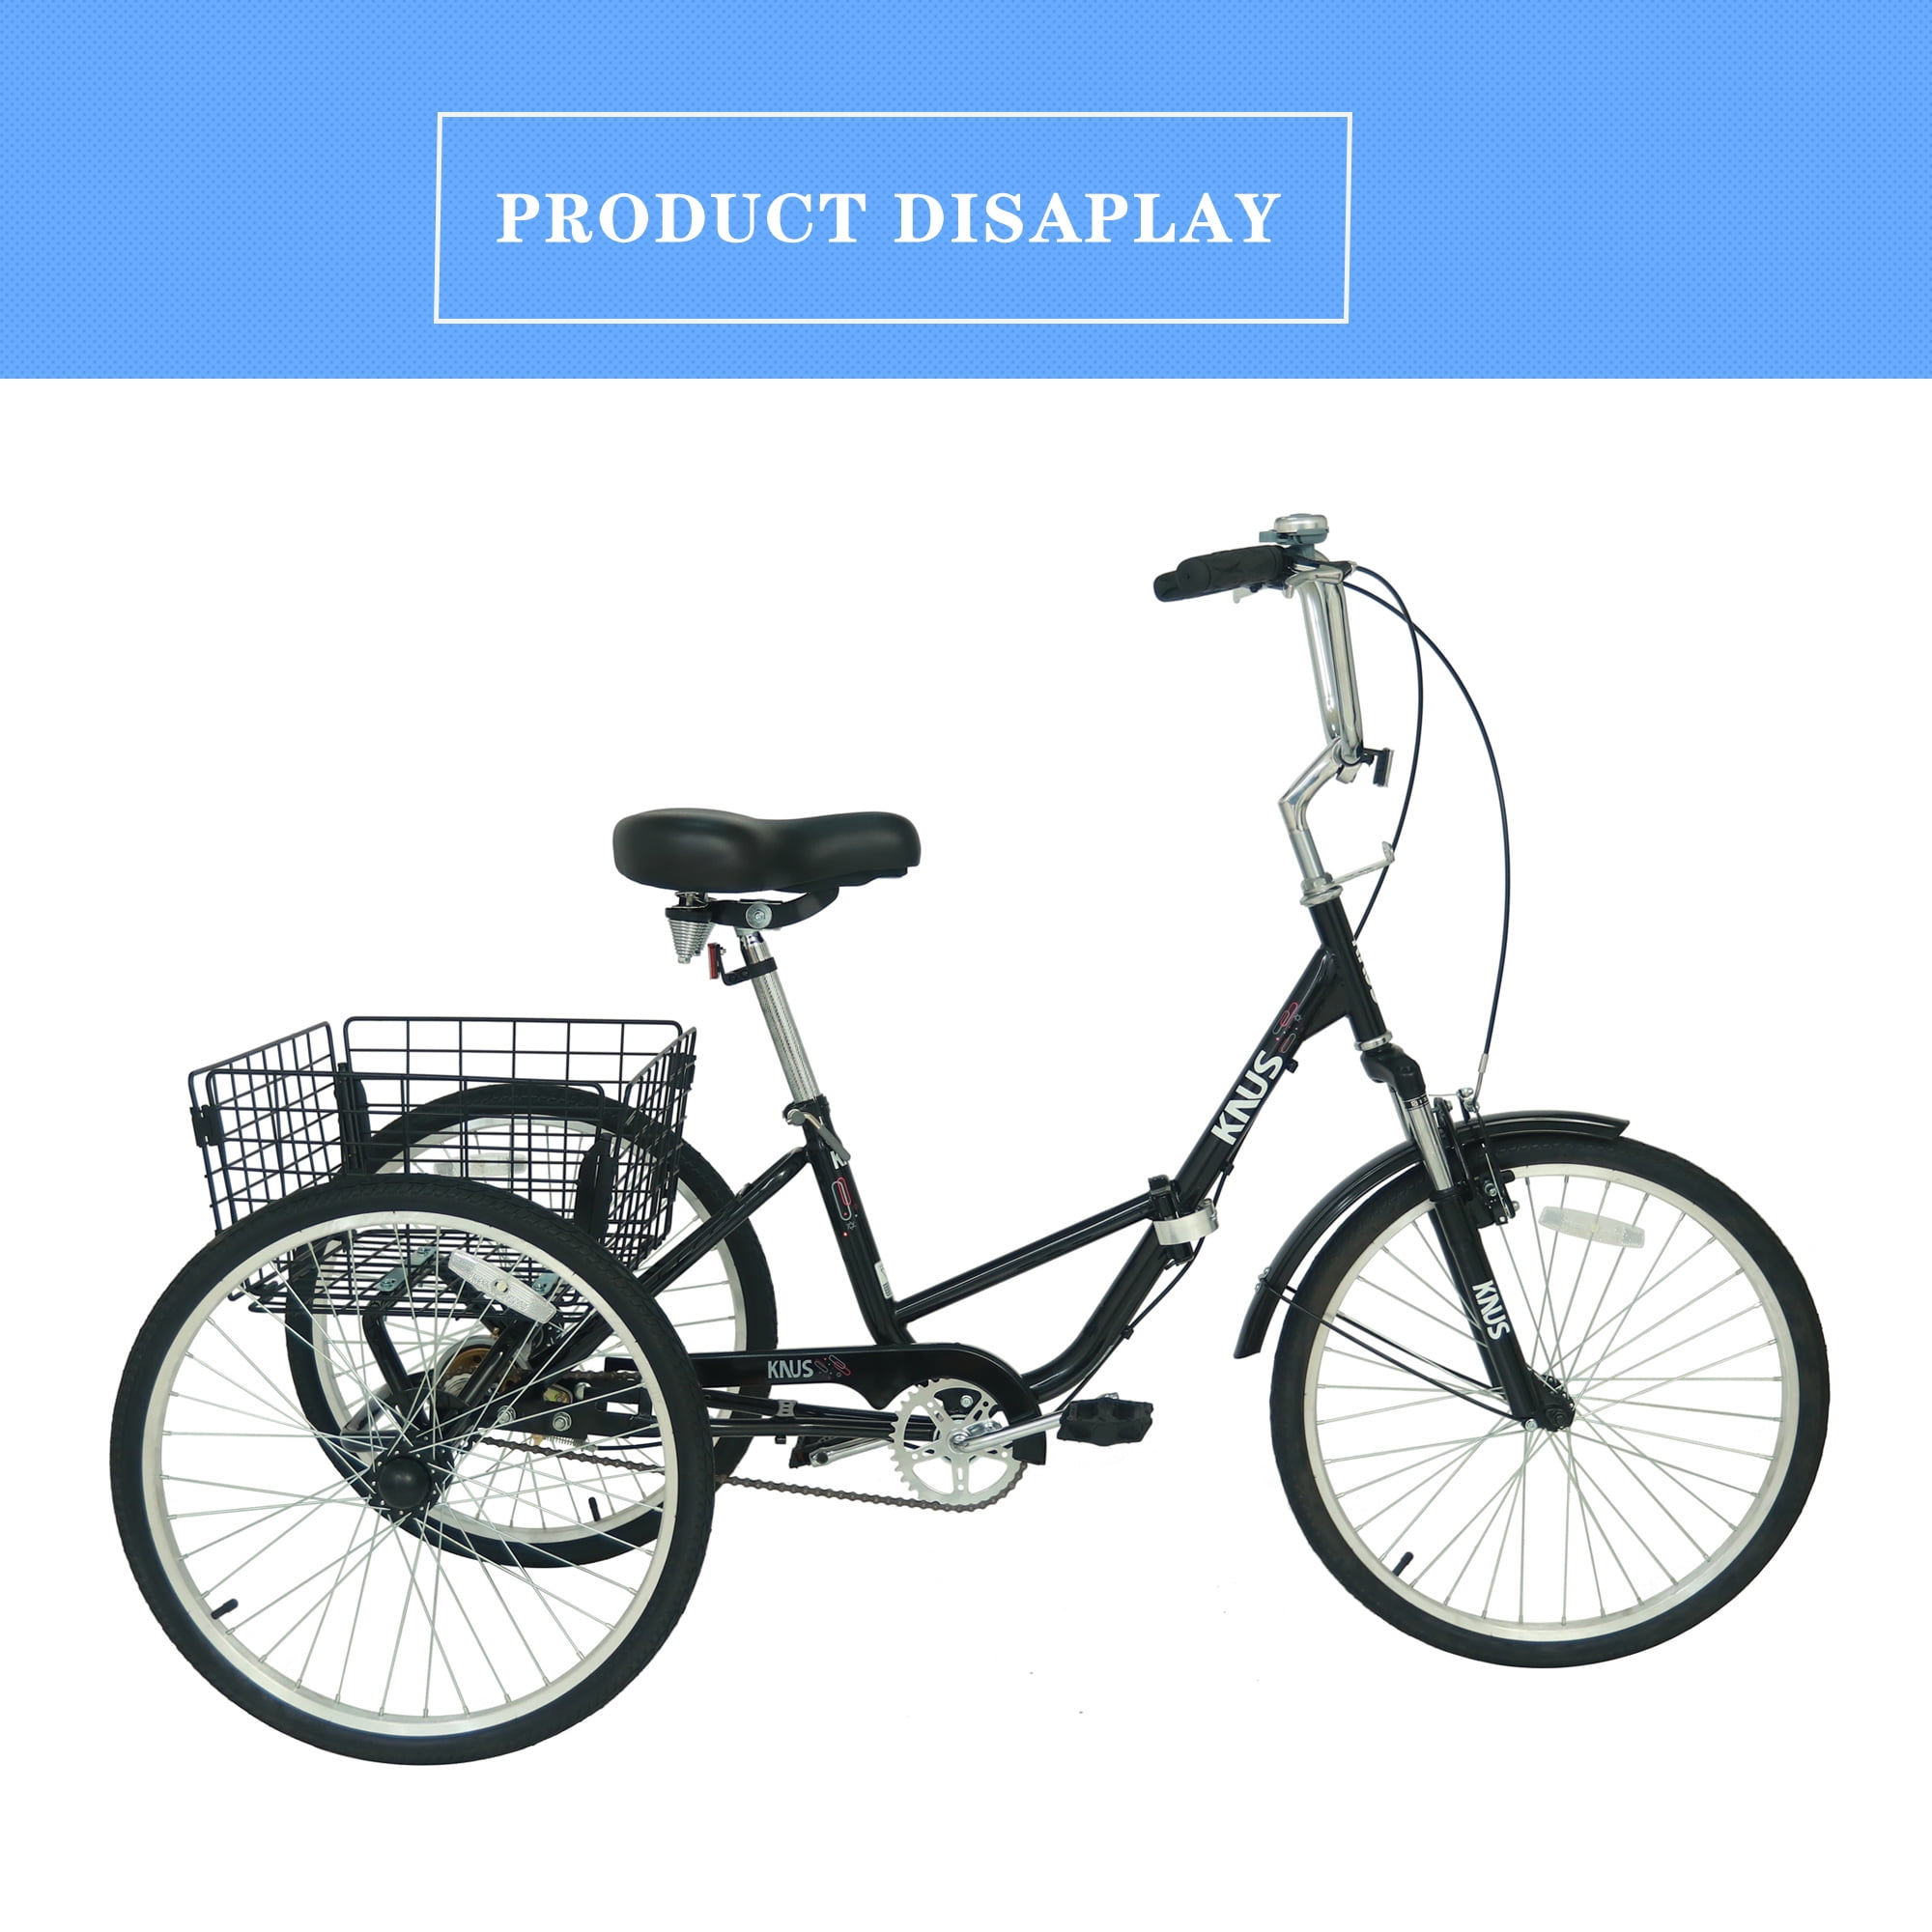 MENGYY Adult Tricycle Folding for Seniors Comfortable seat Wheel Bicycle  with Shopping Basket Double Chain 20 Inch Shock Absorber Front Fo  コンビニ受取対応商品